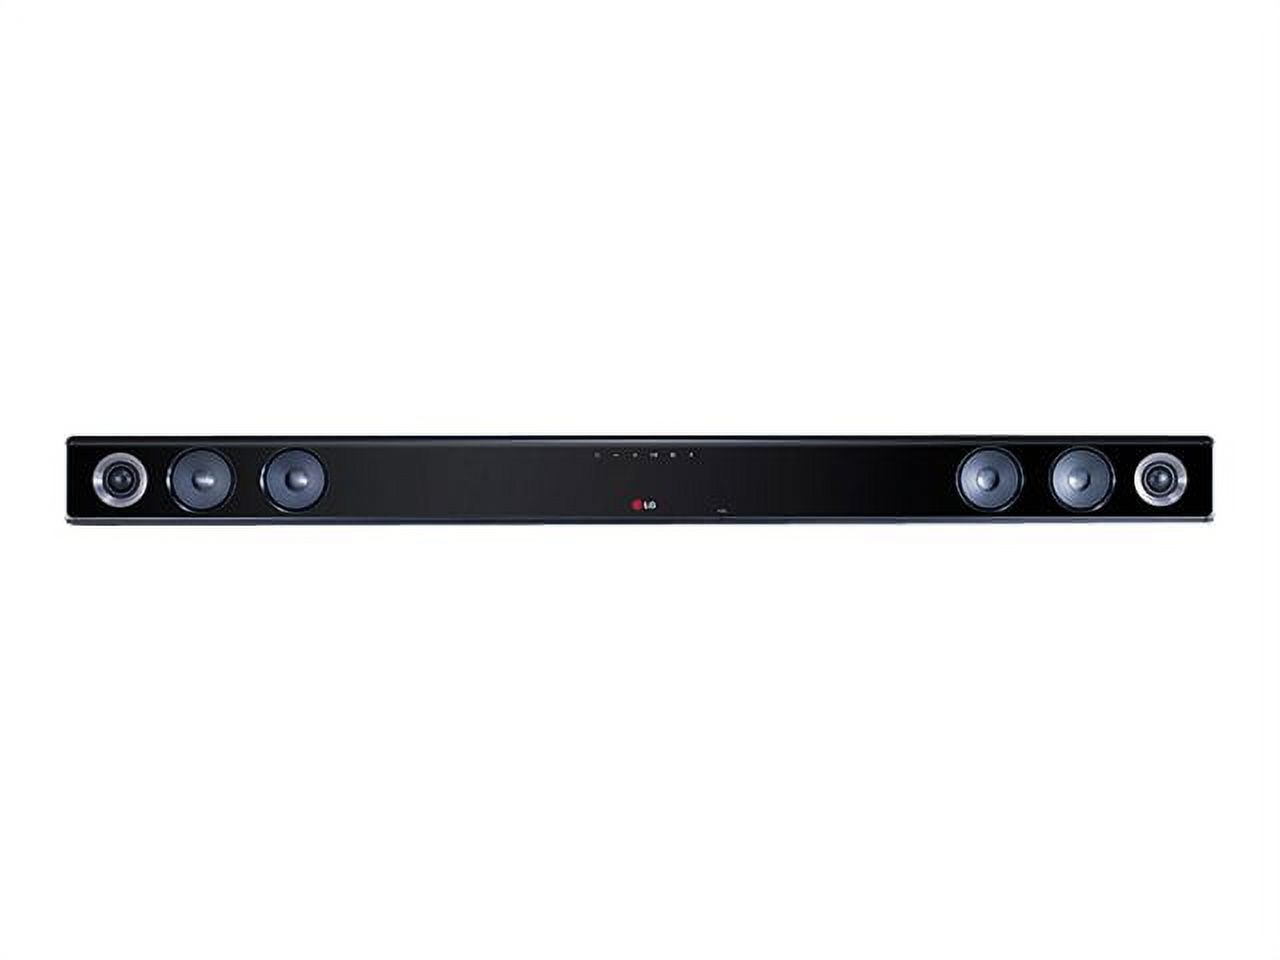 LG NB3530A 300W 2.1-Channel Sound Bar with Wireless Subwoofer - image 3 of 4